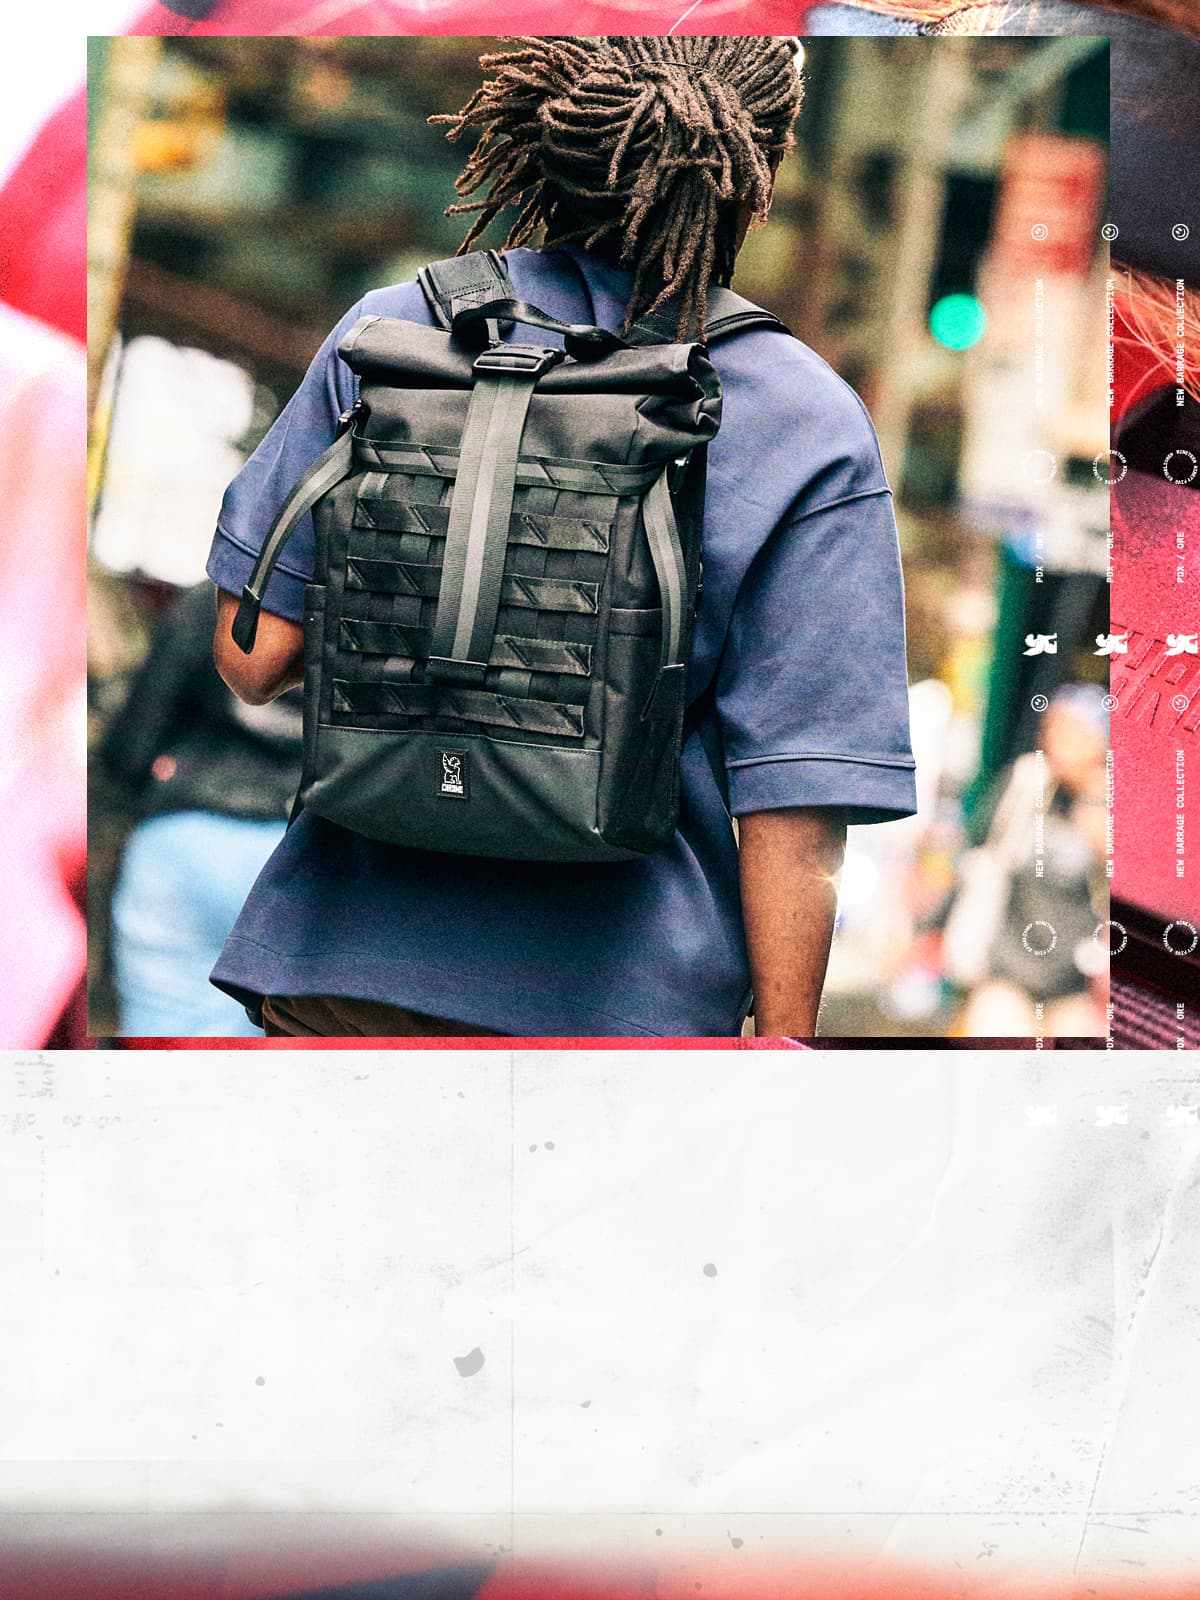 Man carrying a black barrage backpack